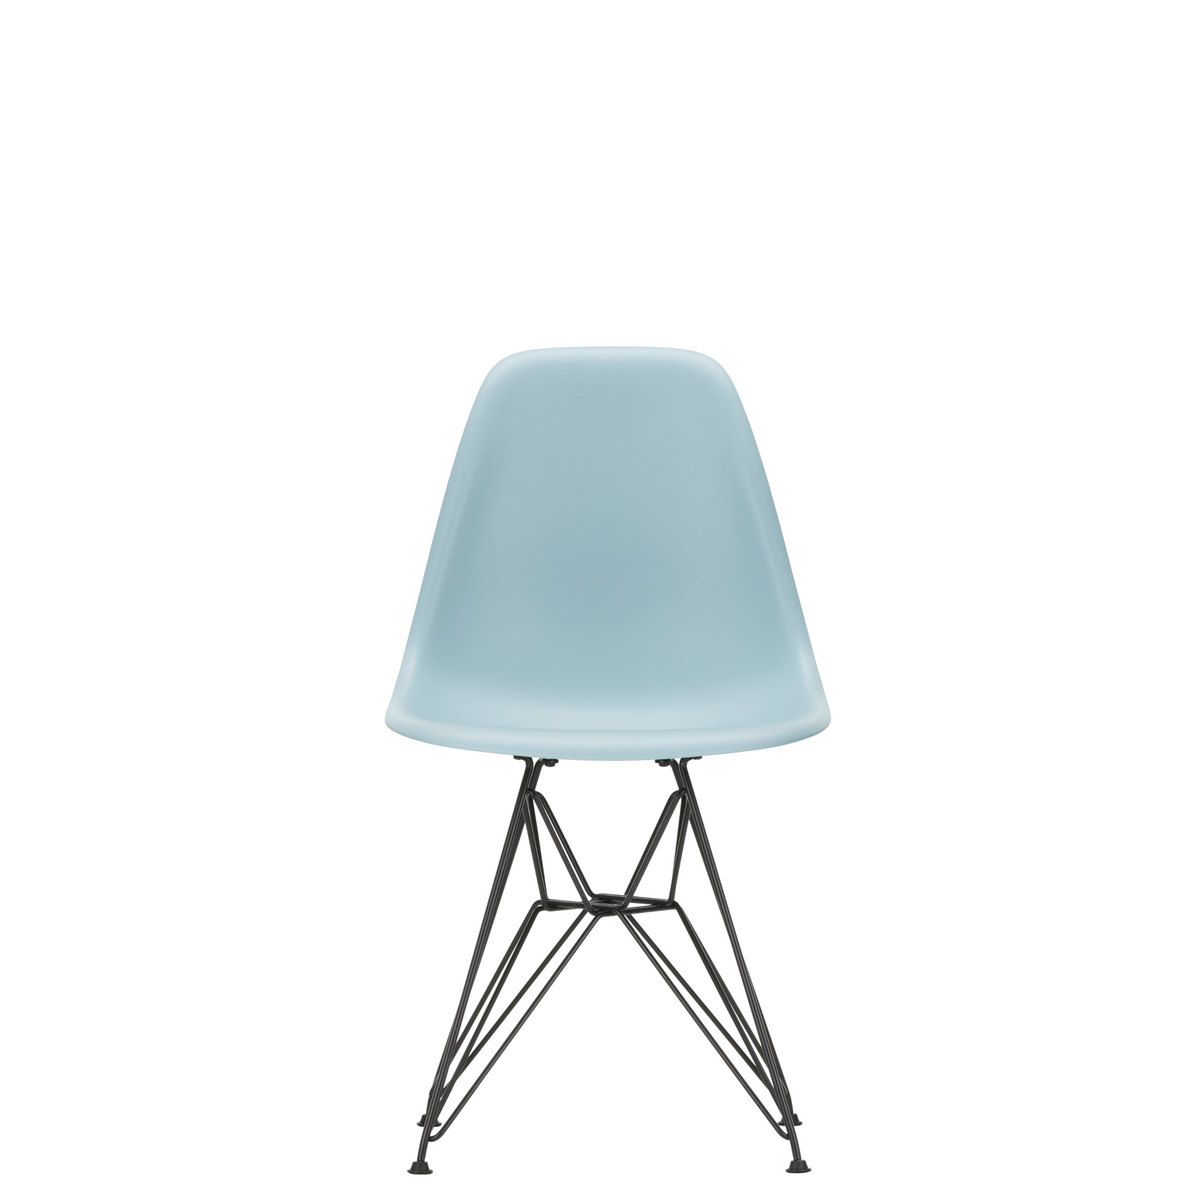 Vitra Eames Plastic Side Chair DSR Powder Coated for Outdoor Use Ice Grey Shell Black Powdercoated Base